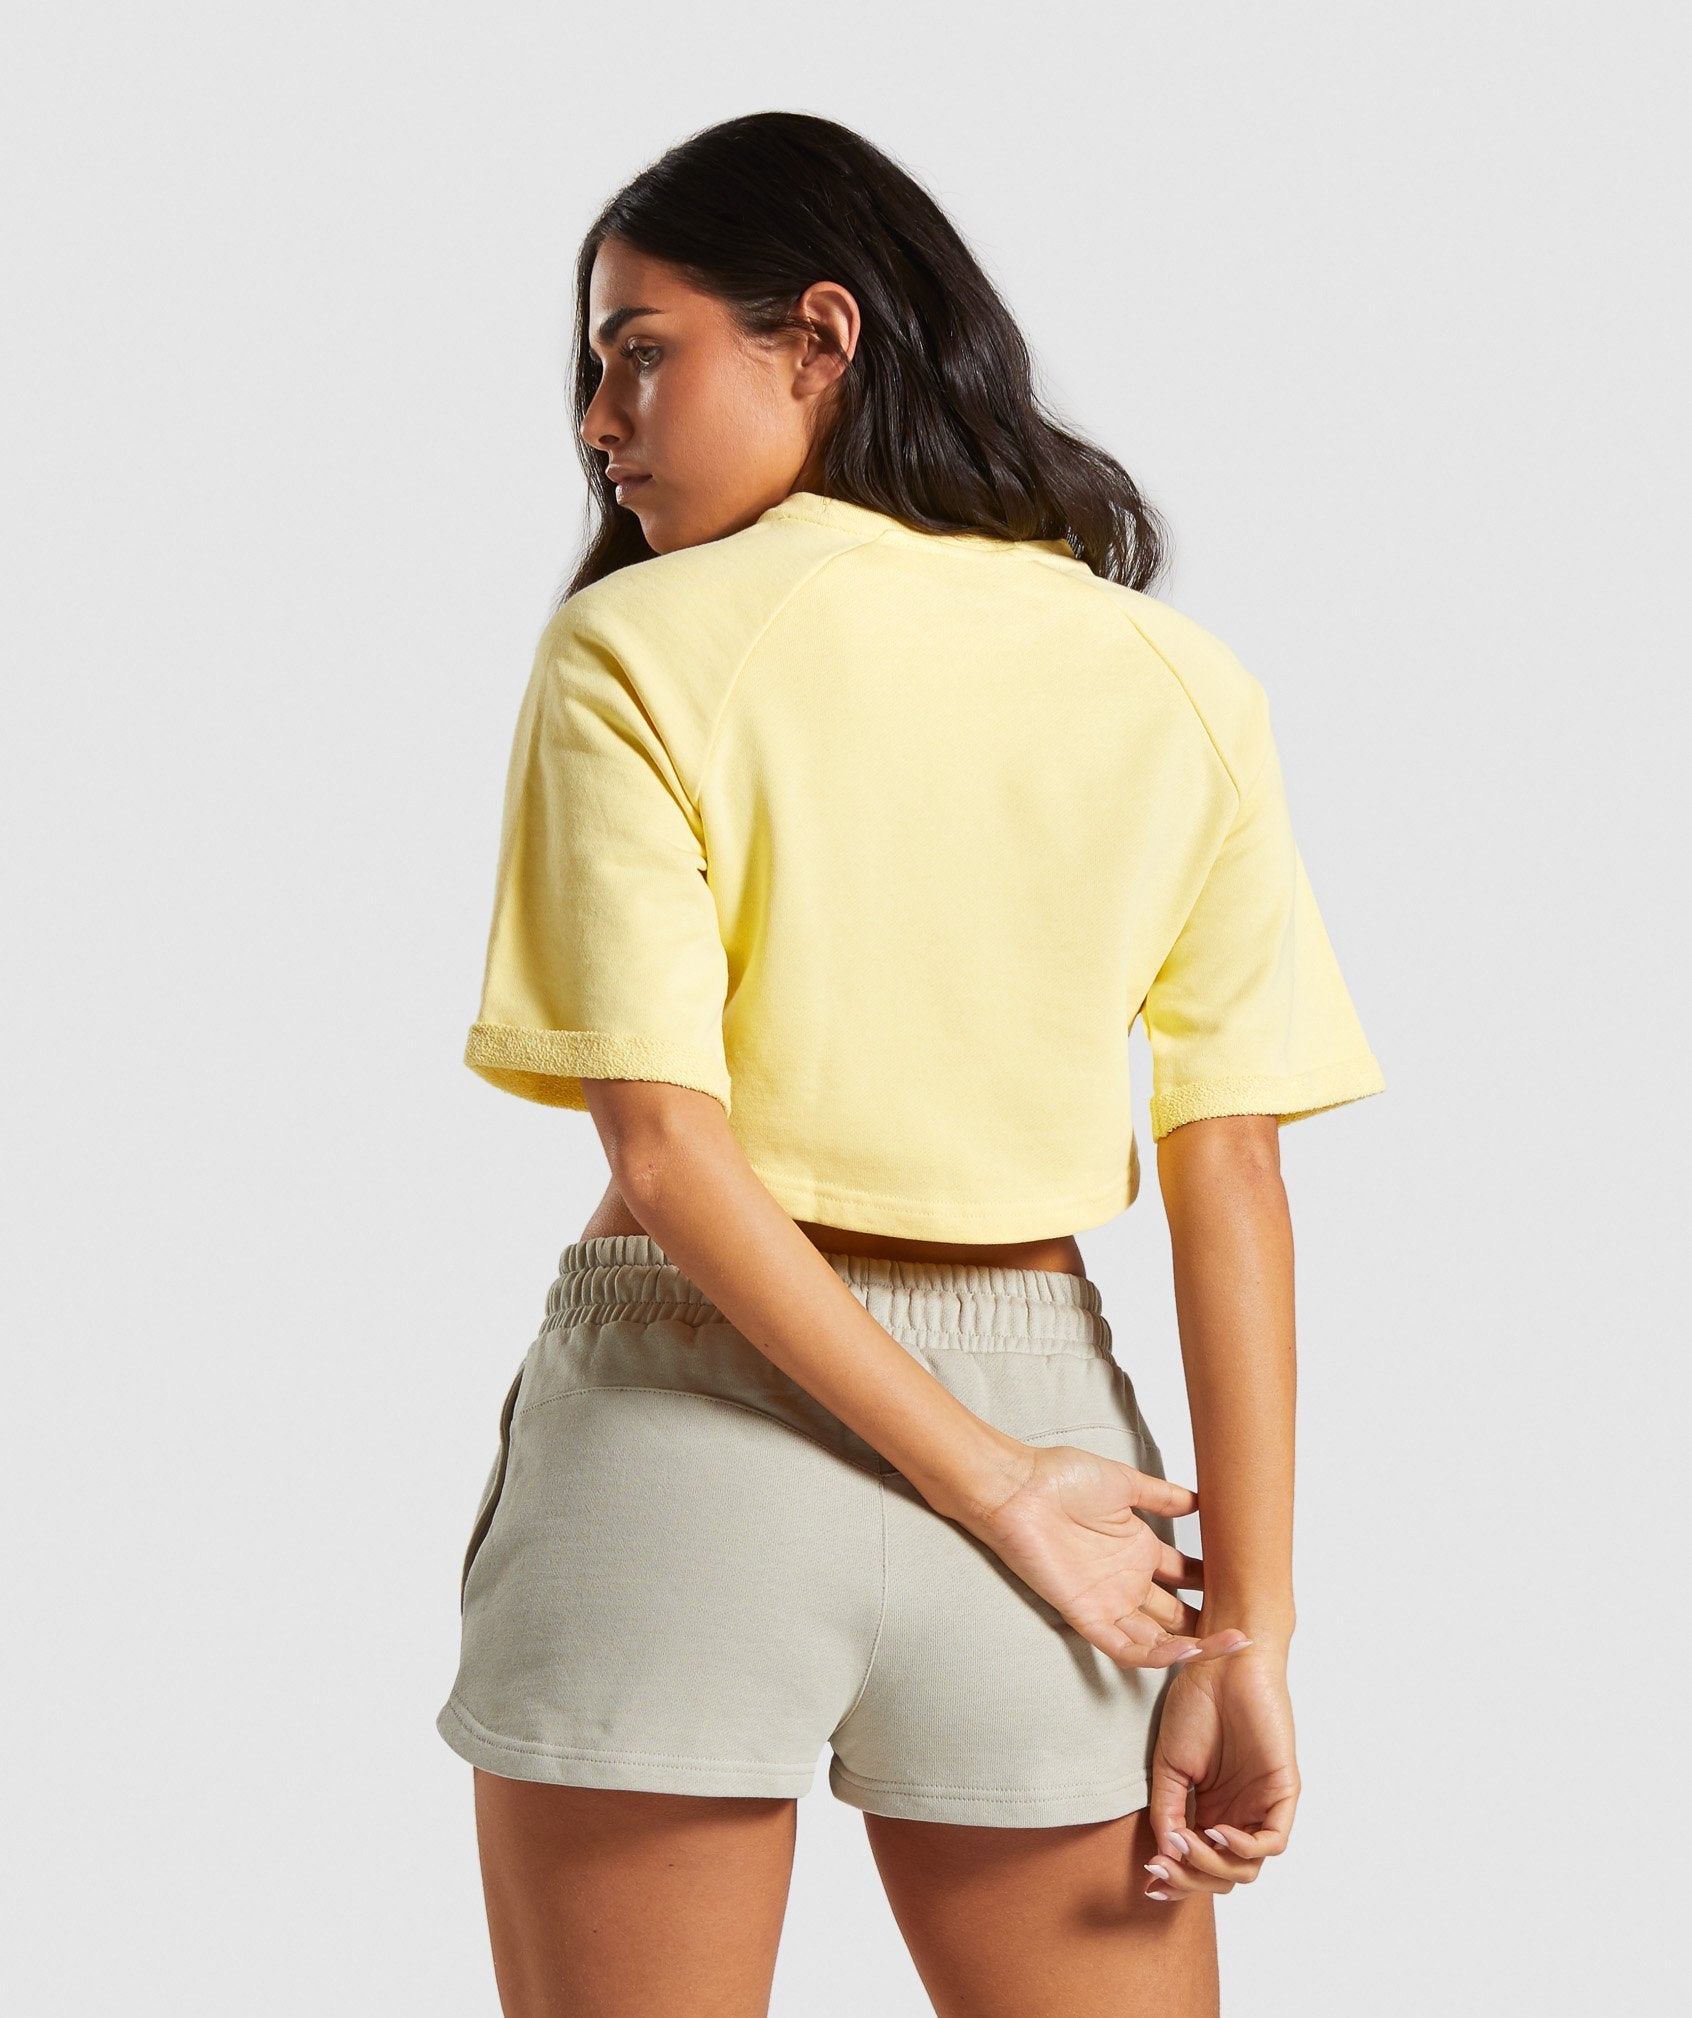 Botanic Graphic Boxy Crop Top in Yellow - view 2